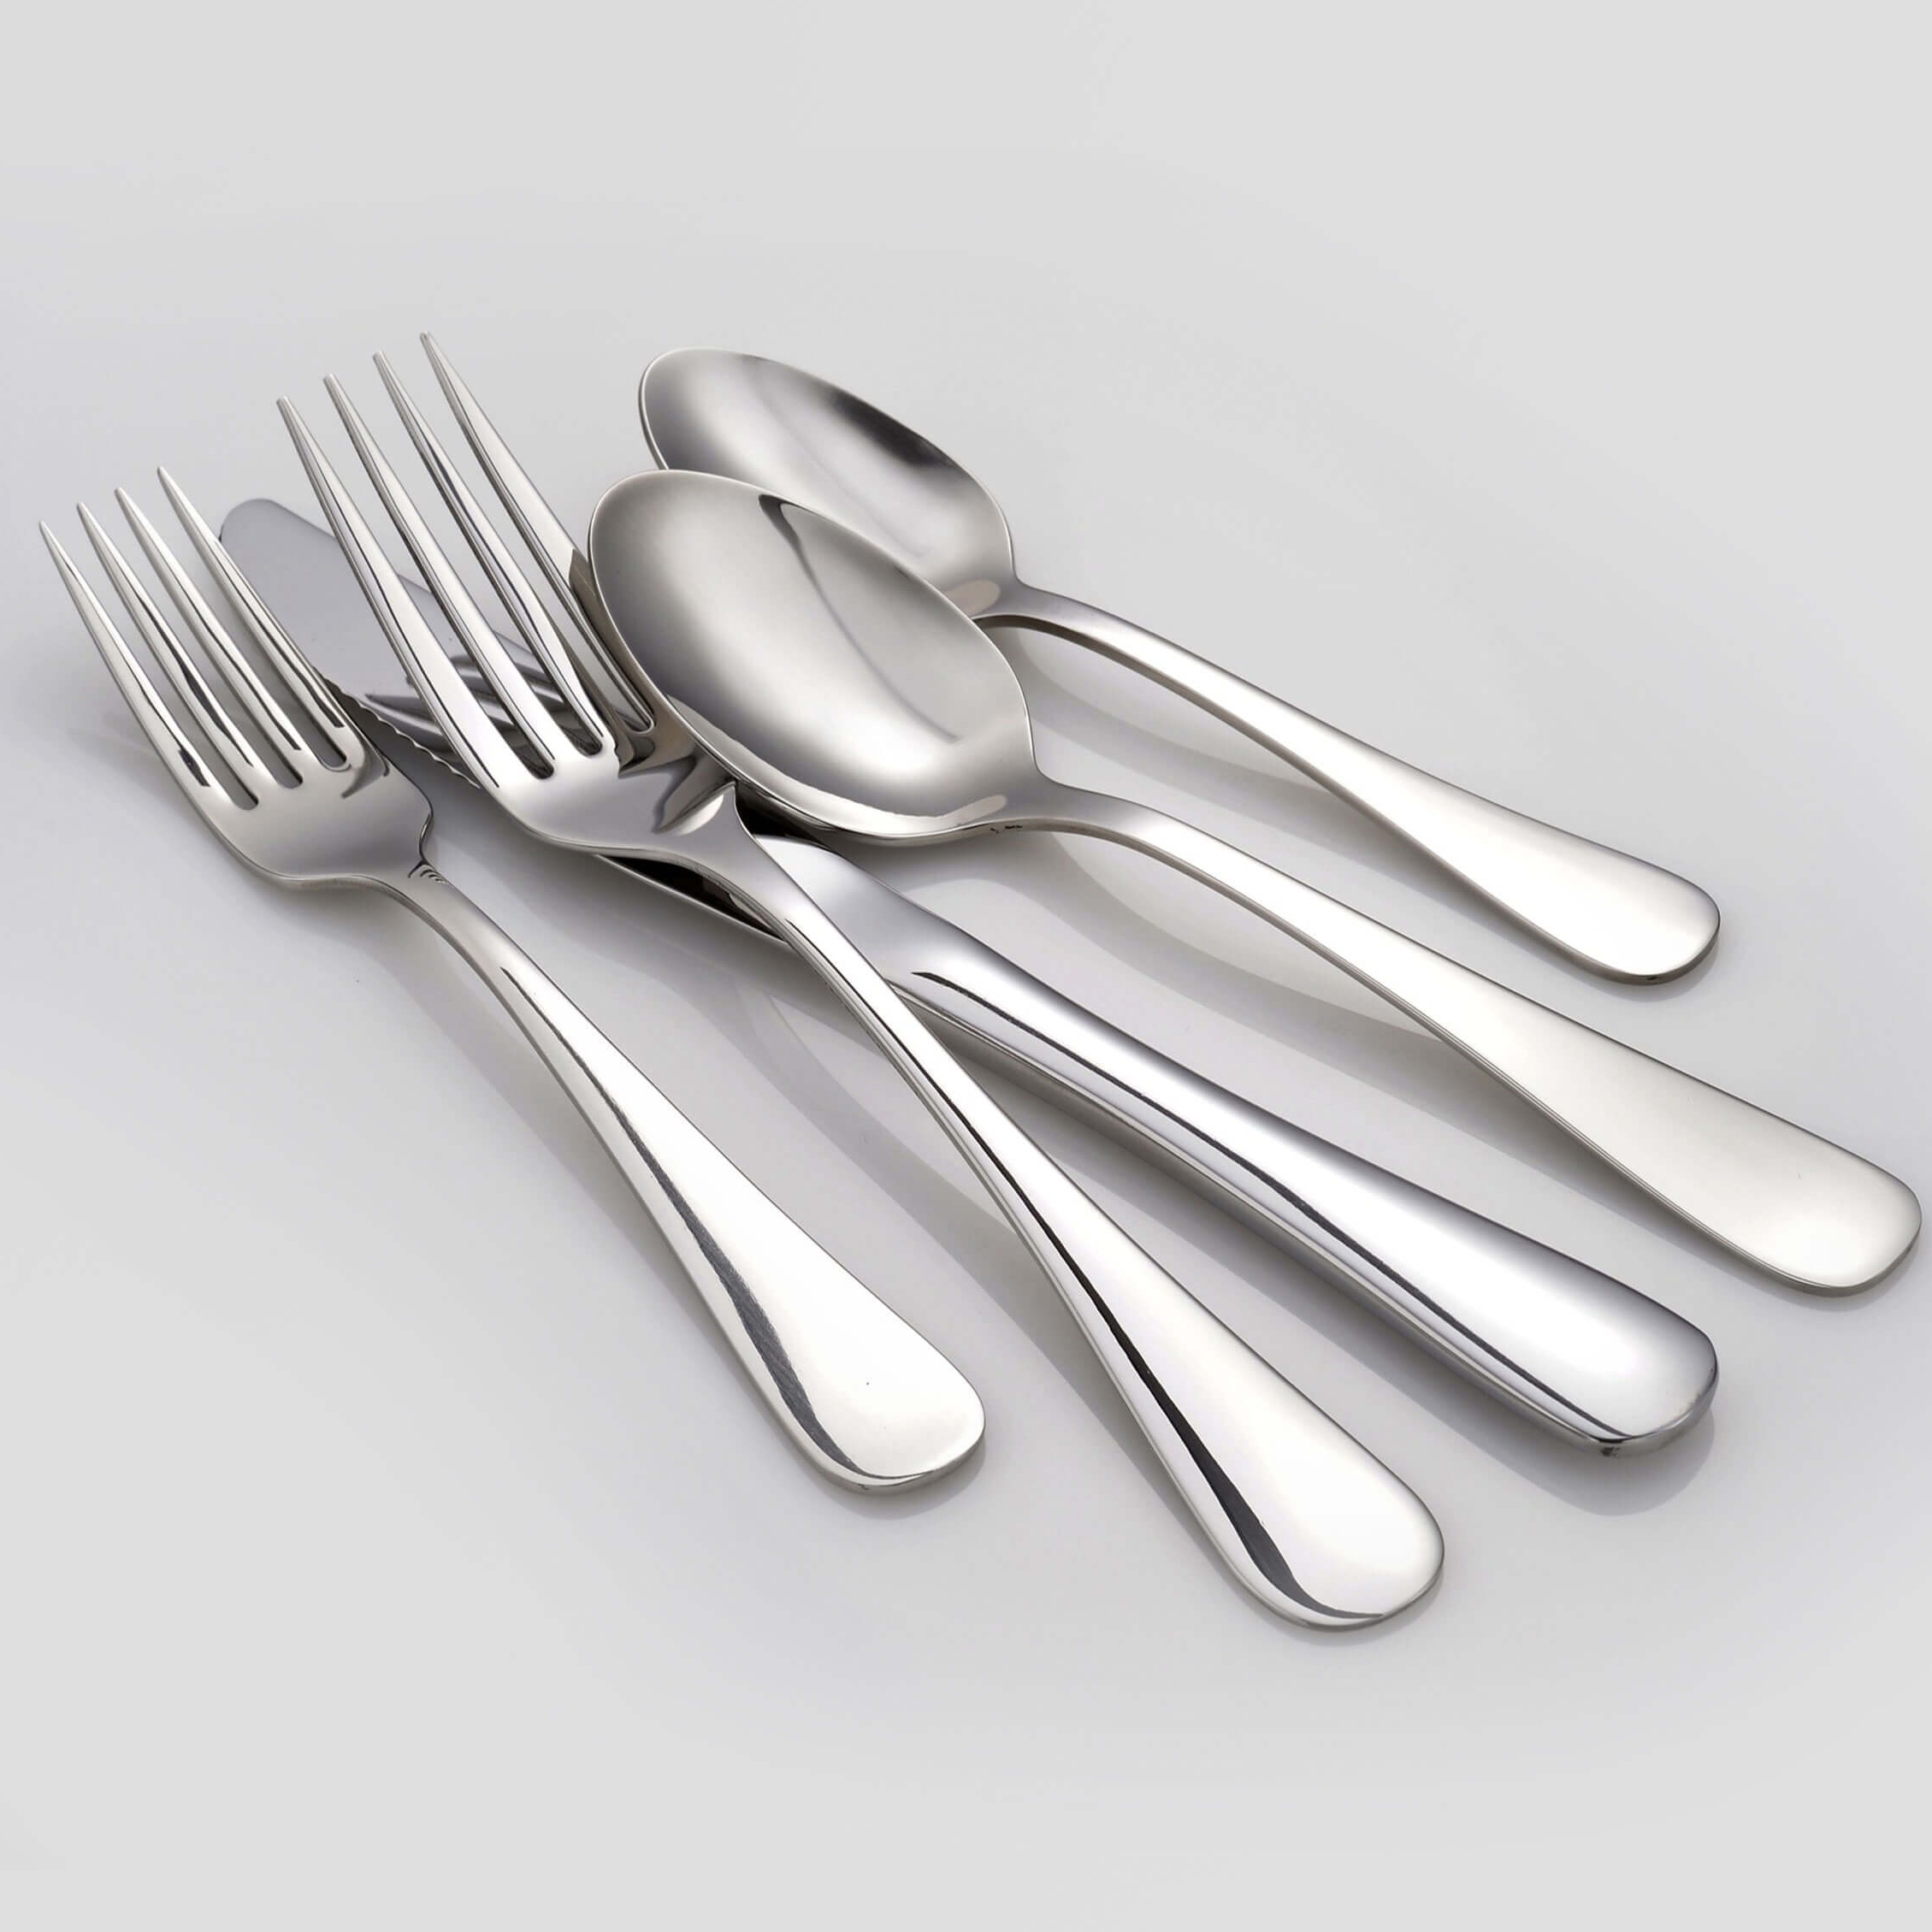 Annapolis 18/10 Stainless Steel Flatware Liberty Tabletop